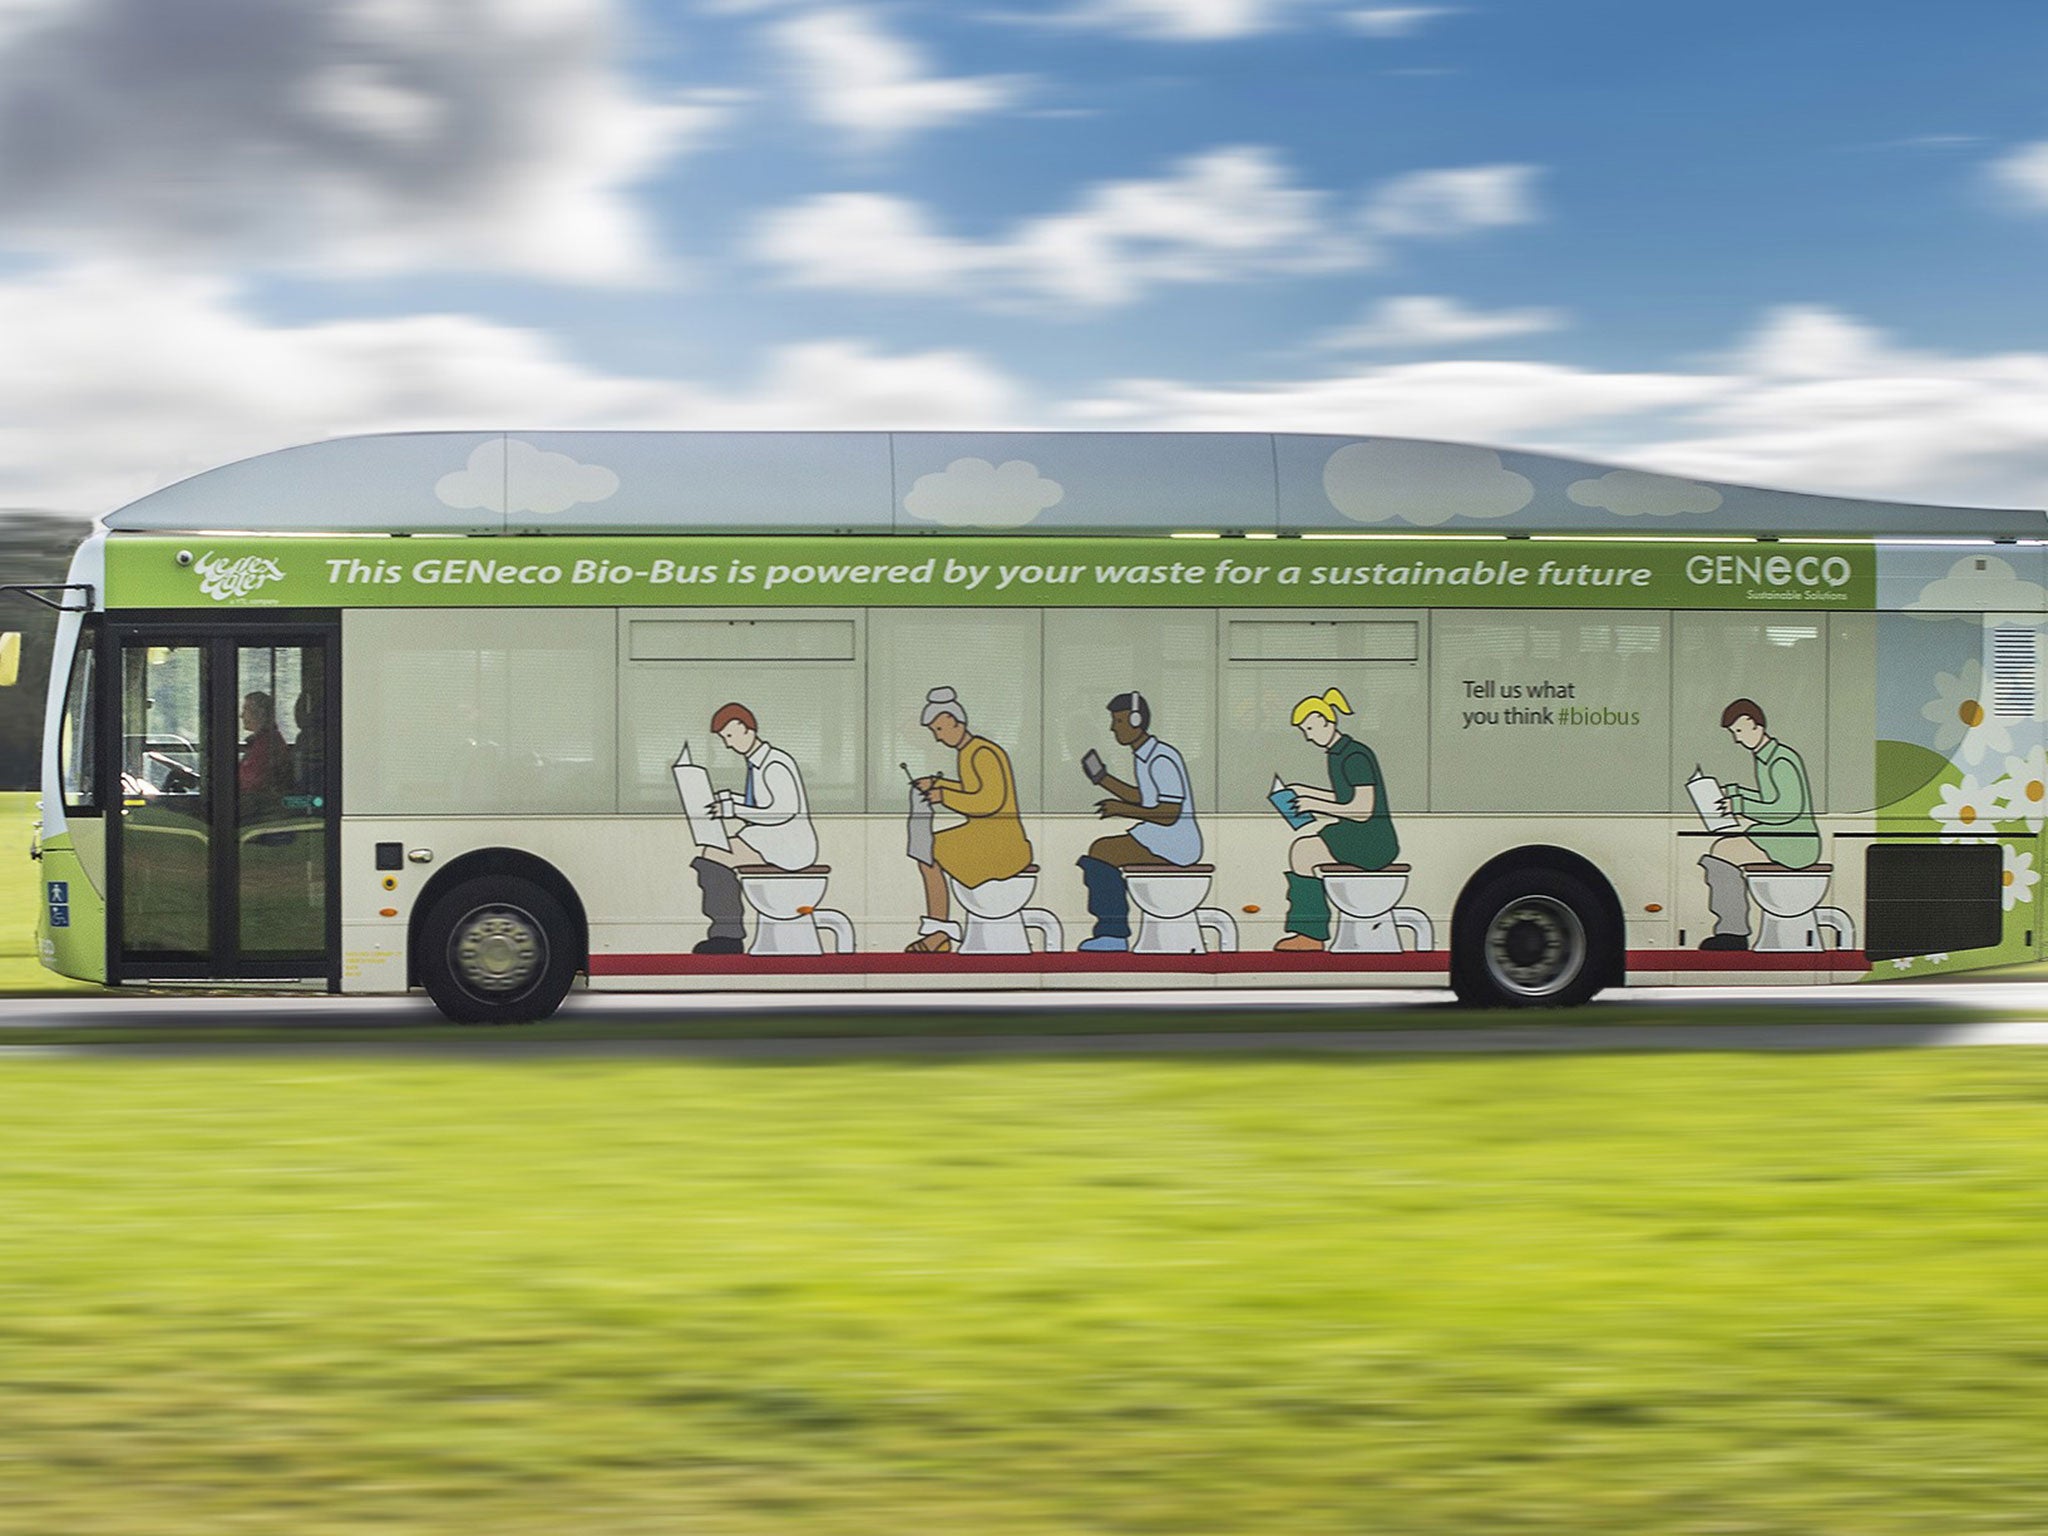 The Bio-Bus which is powered entirely by human and food waste